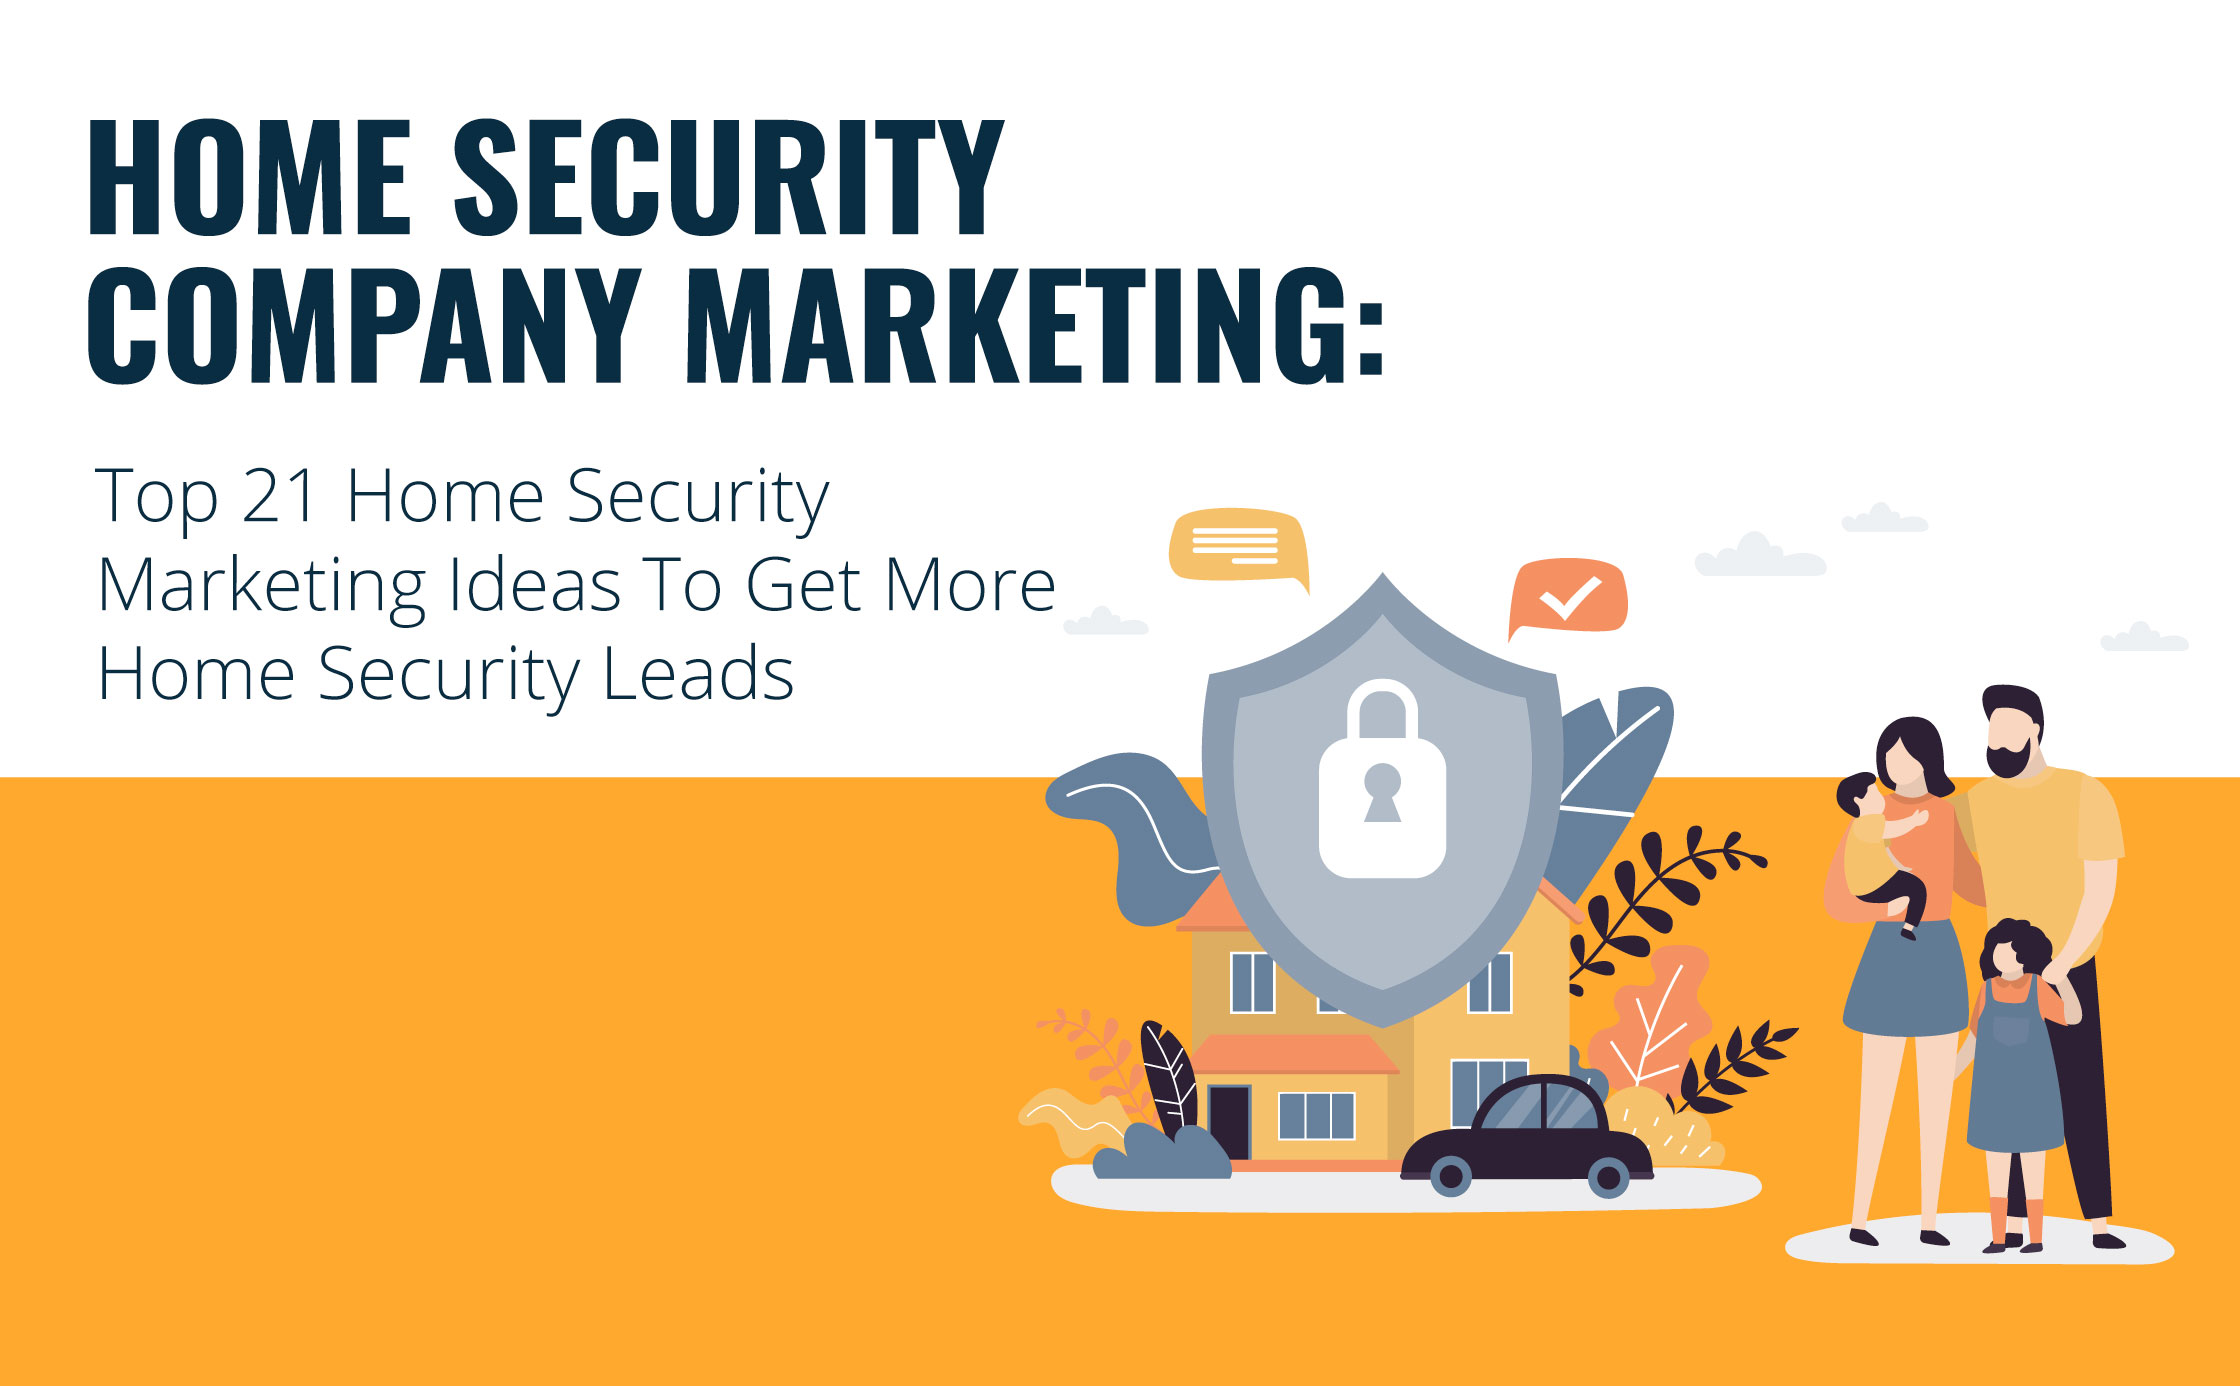  Home Security Company Marketing: Top 21 Home Security Marketing Ideas To Get More Home Security Leads